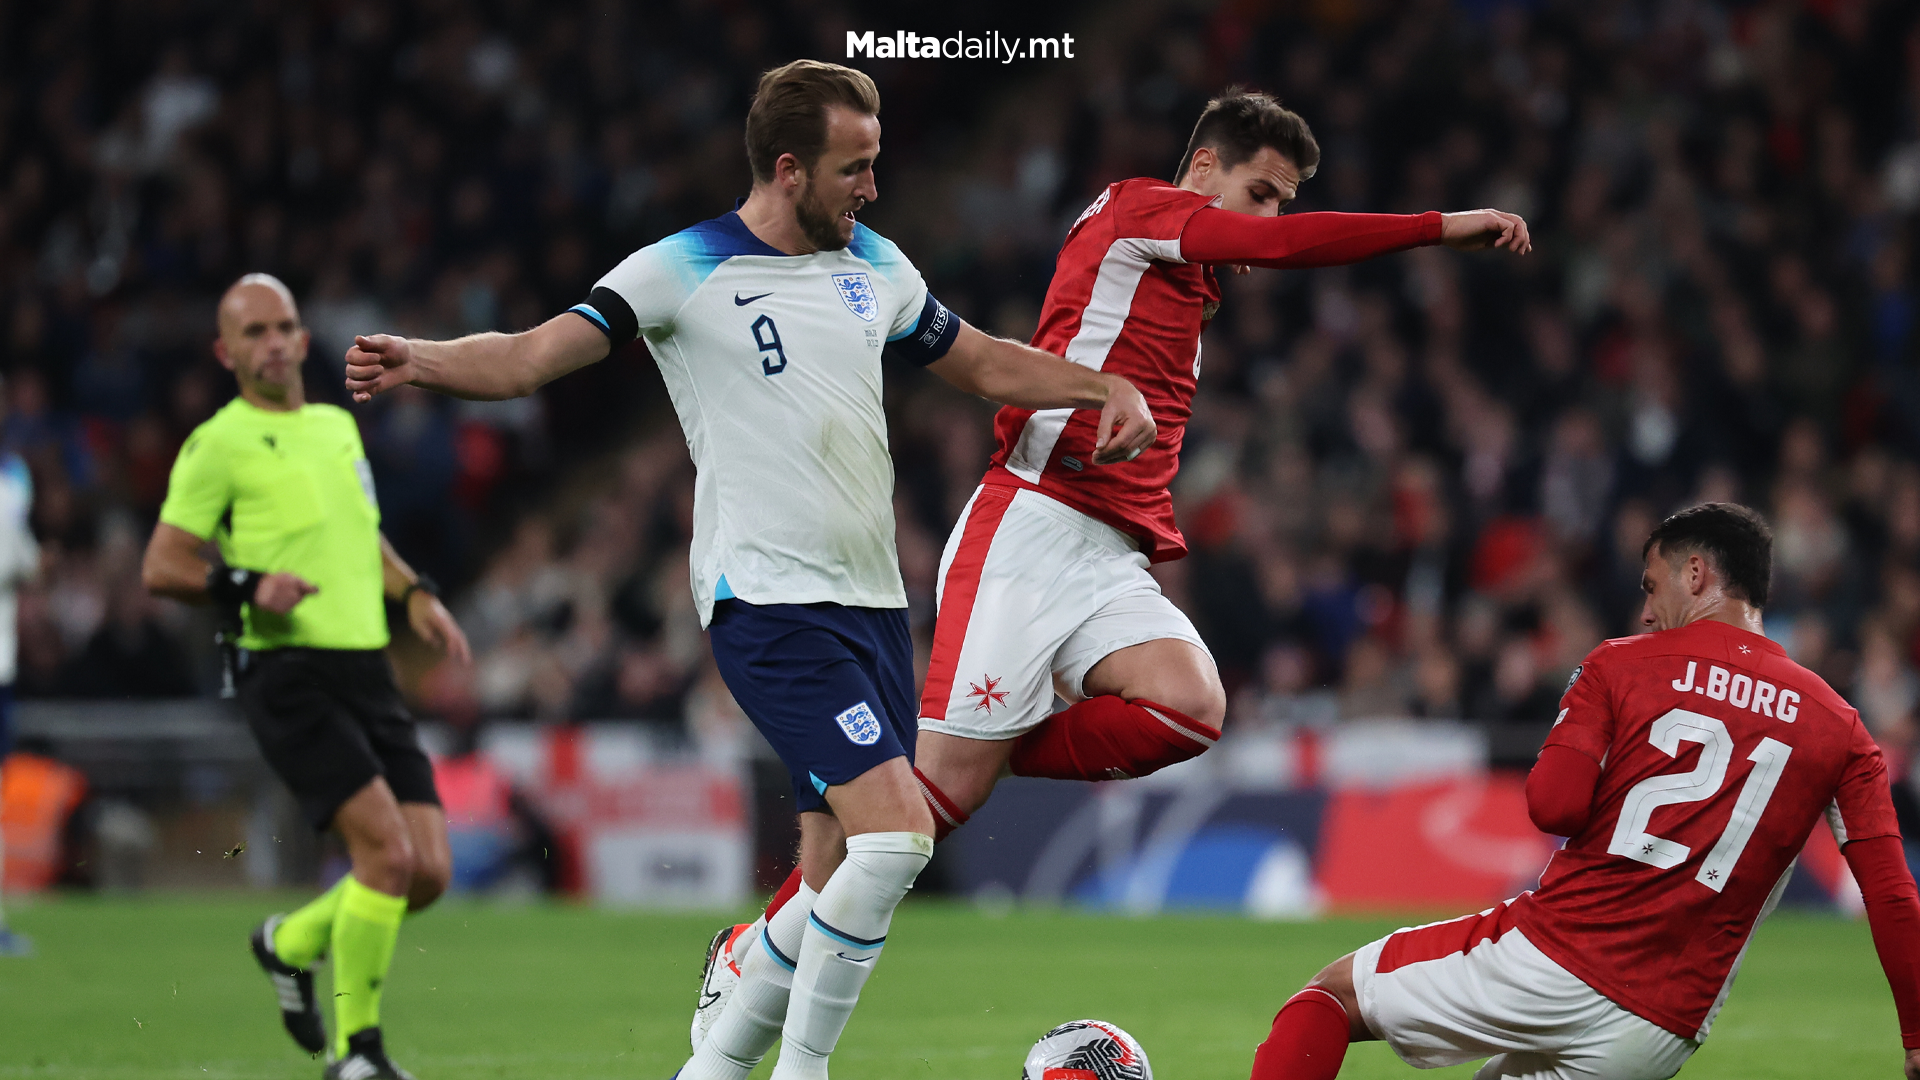 England Faces Criticism for Lackluster Performance in 2-0 Victory Against Malta